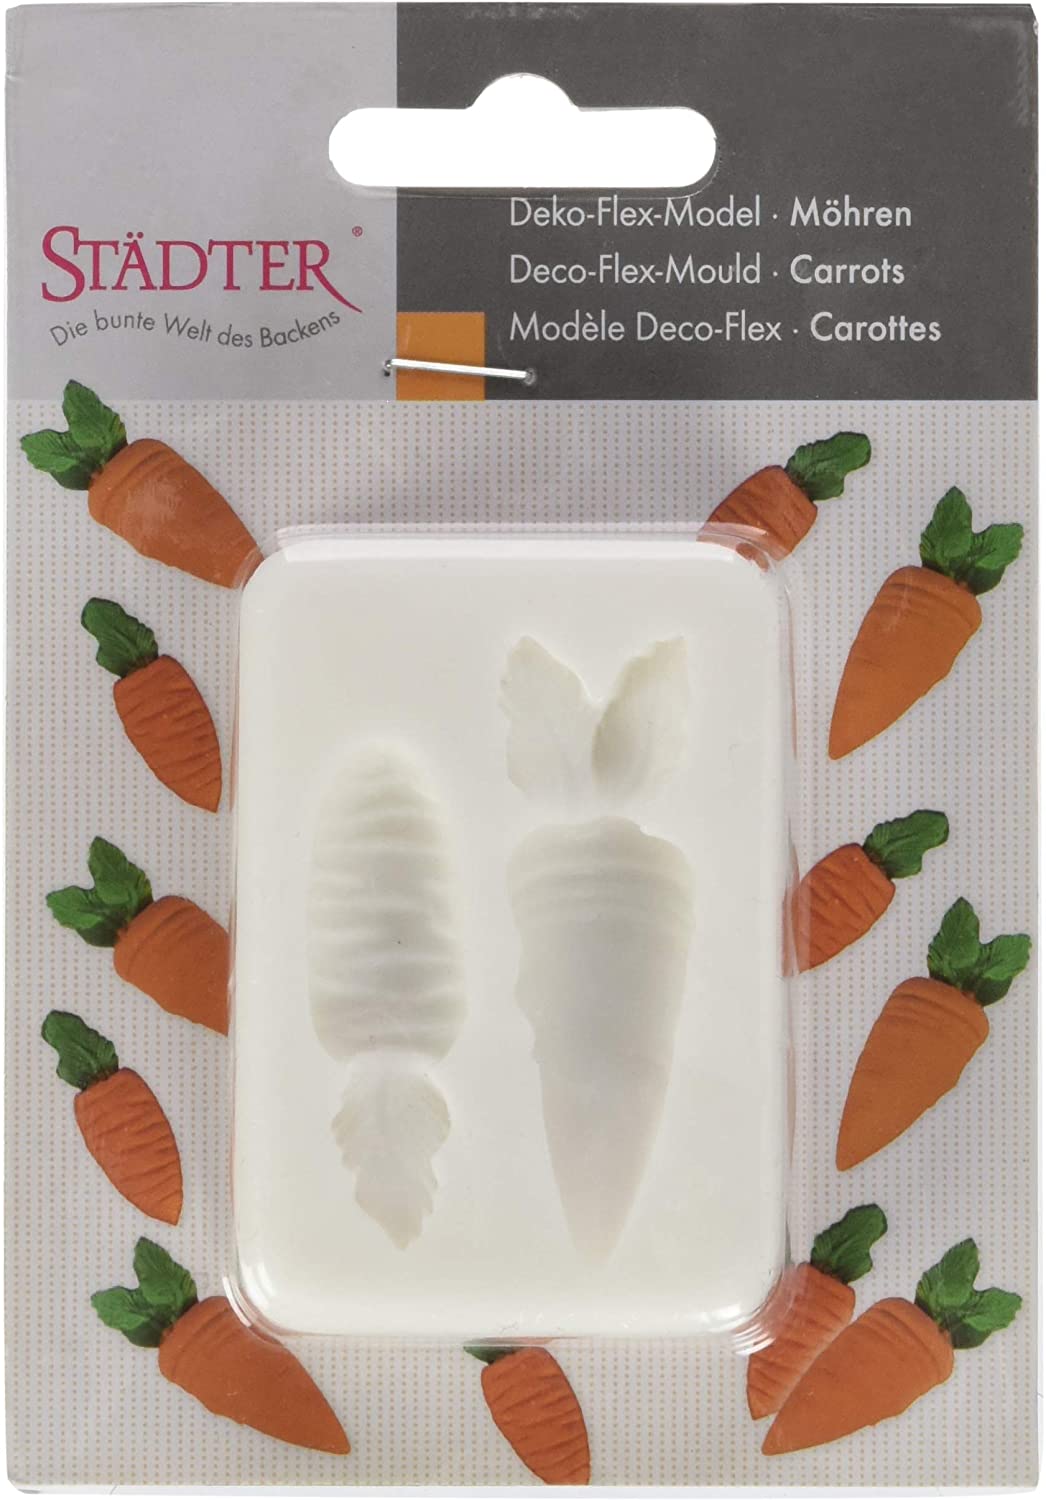 Städter 257306 Flexible Silicone Starfish Decoration Mould Model Carrot Carrots